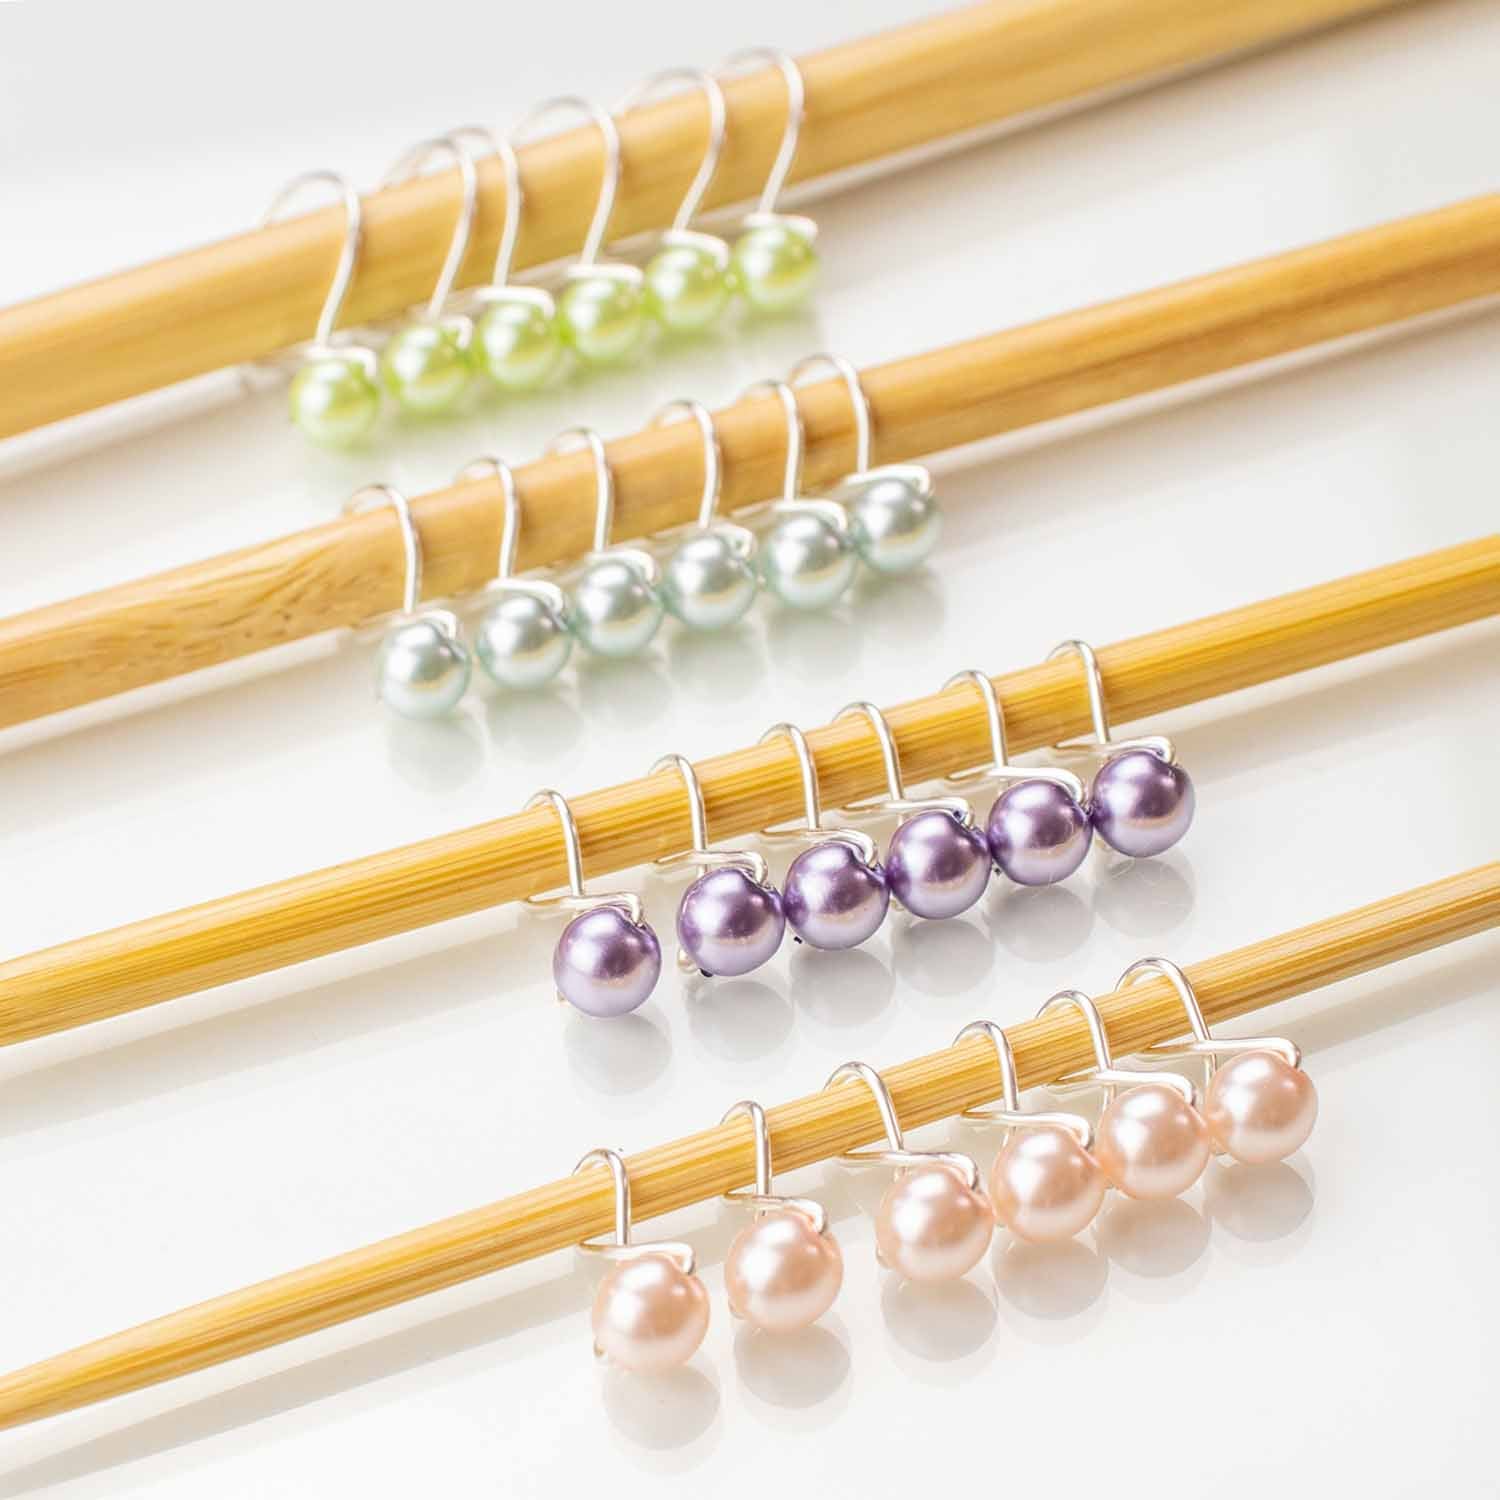 Crochet Hook or Knitting Needle Size Markers, Knitting Marker, Stitch Marker  for Knitting, Sheep Stitch Marker, Crochet Hook Marker 